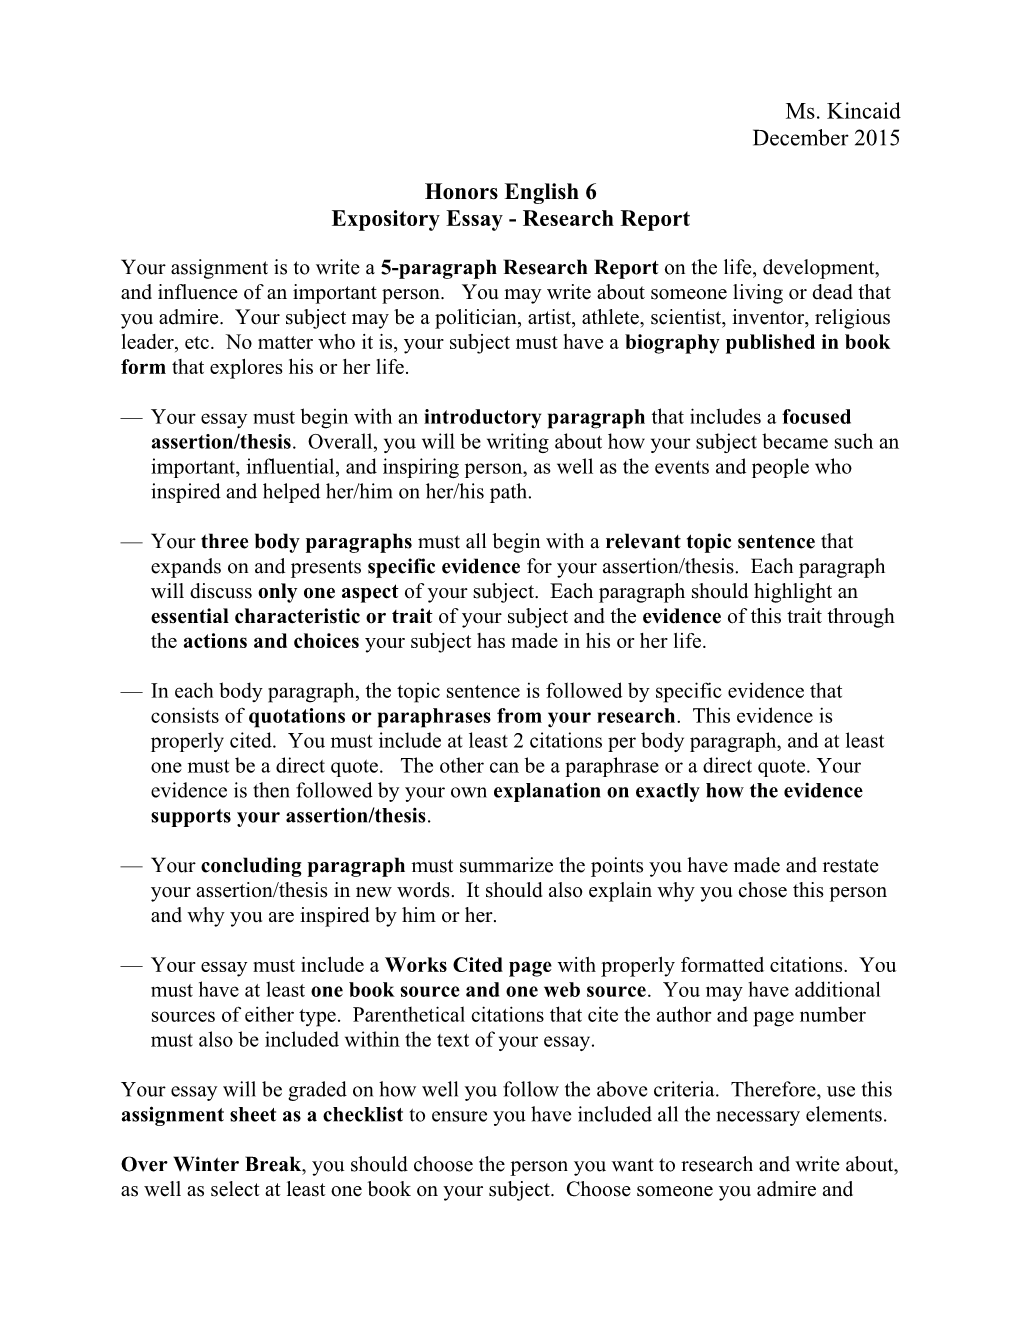 Expository Essay - Research Report